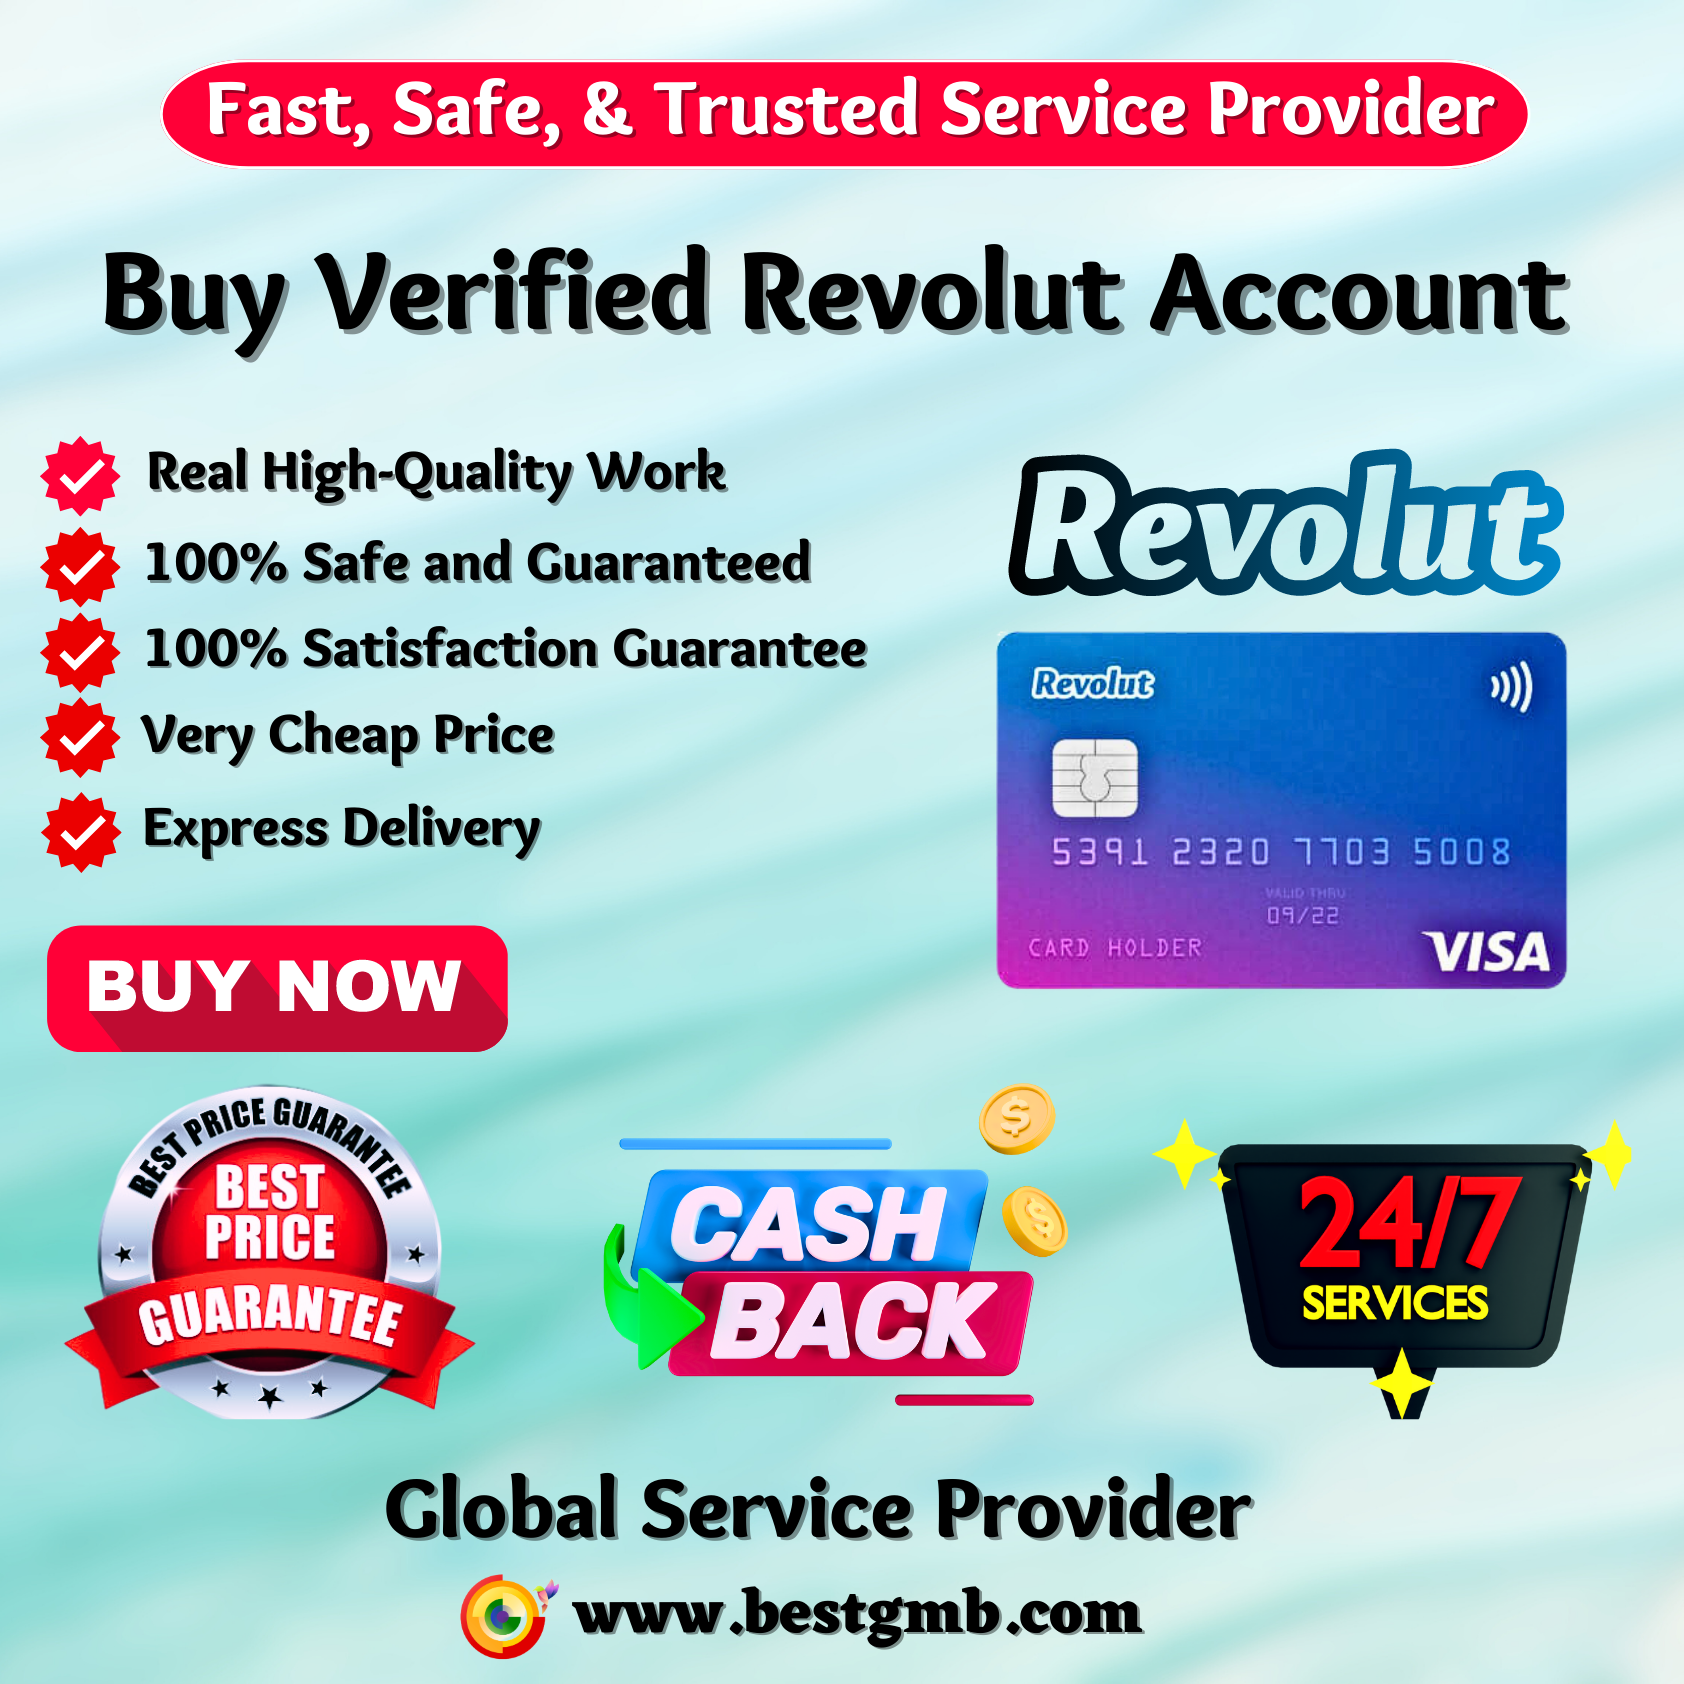 Buy Verified Revolut Account - Fully Verified Personal & Business Account